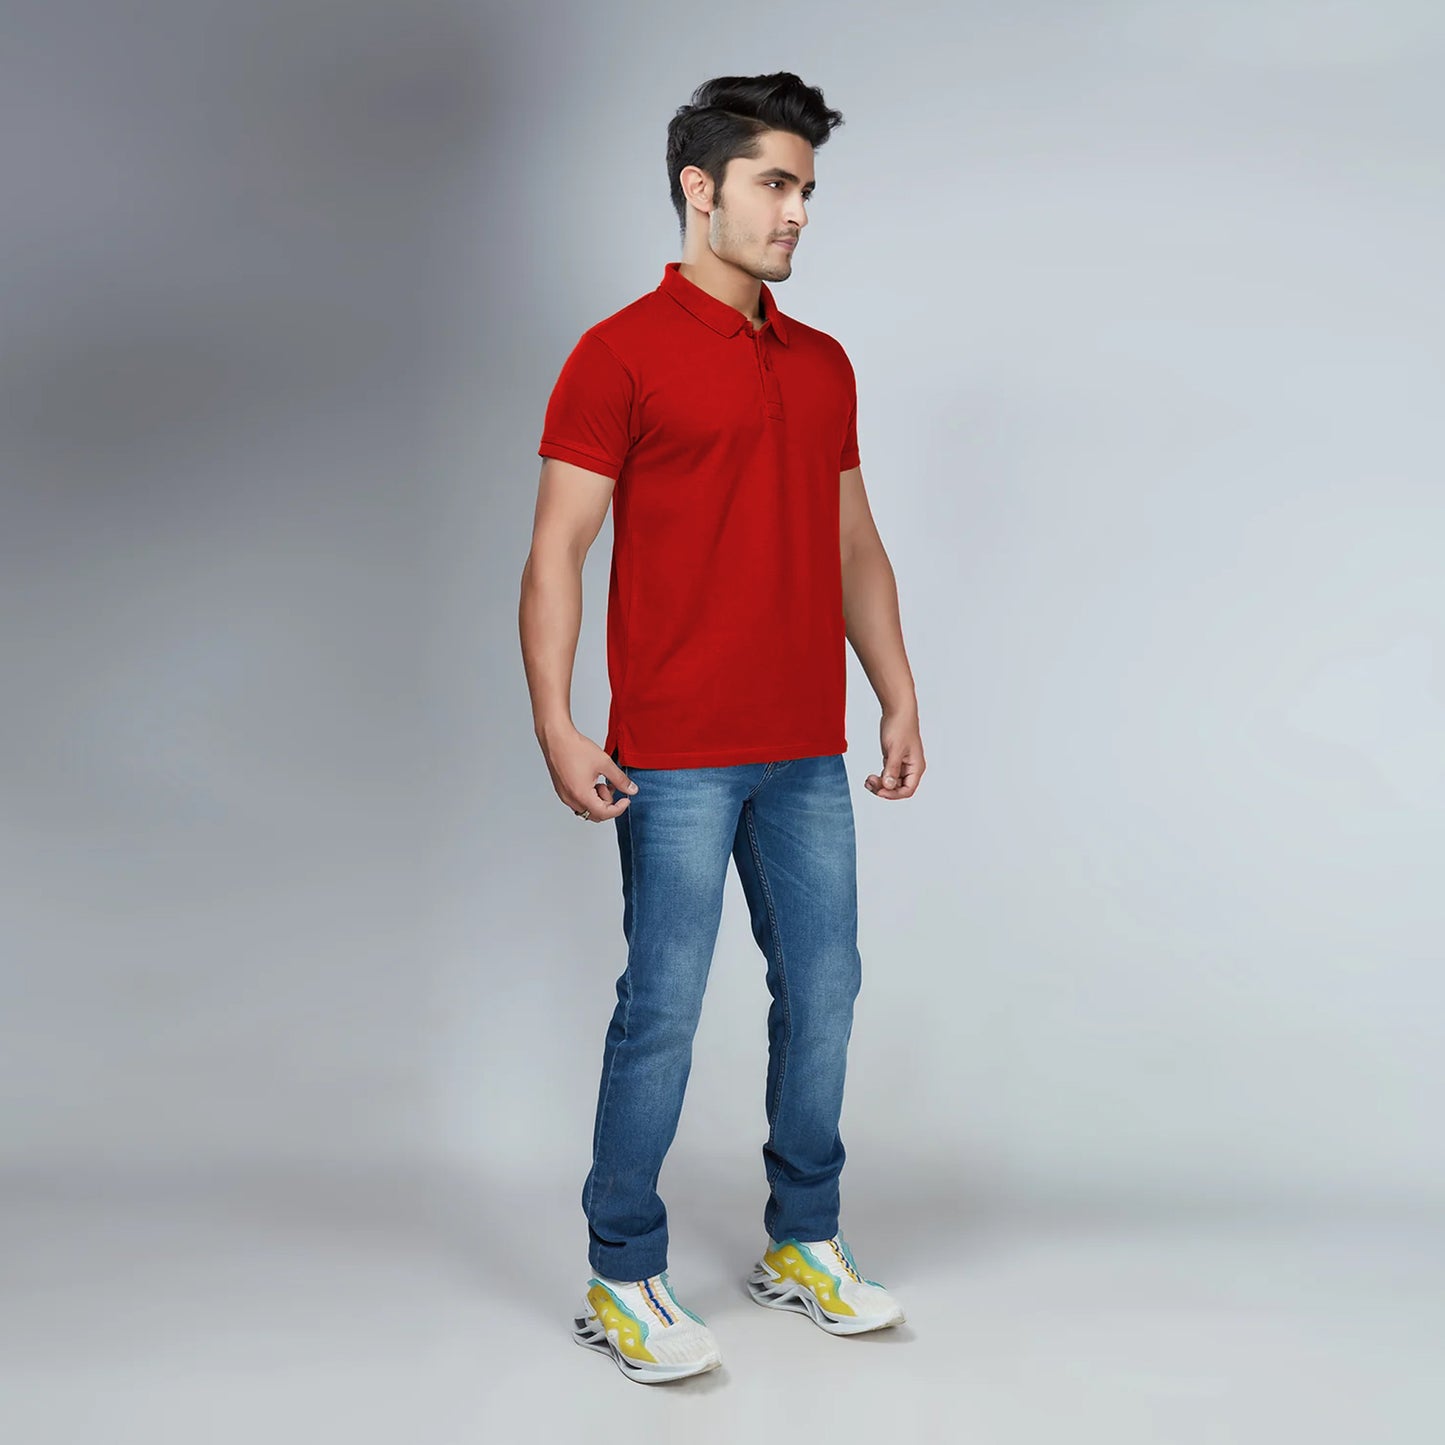 Men's Red Polo T-Shirt